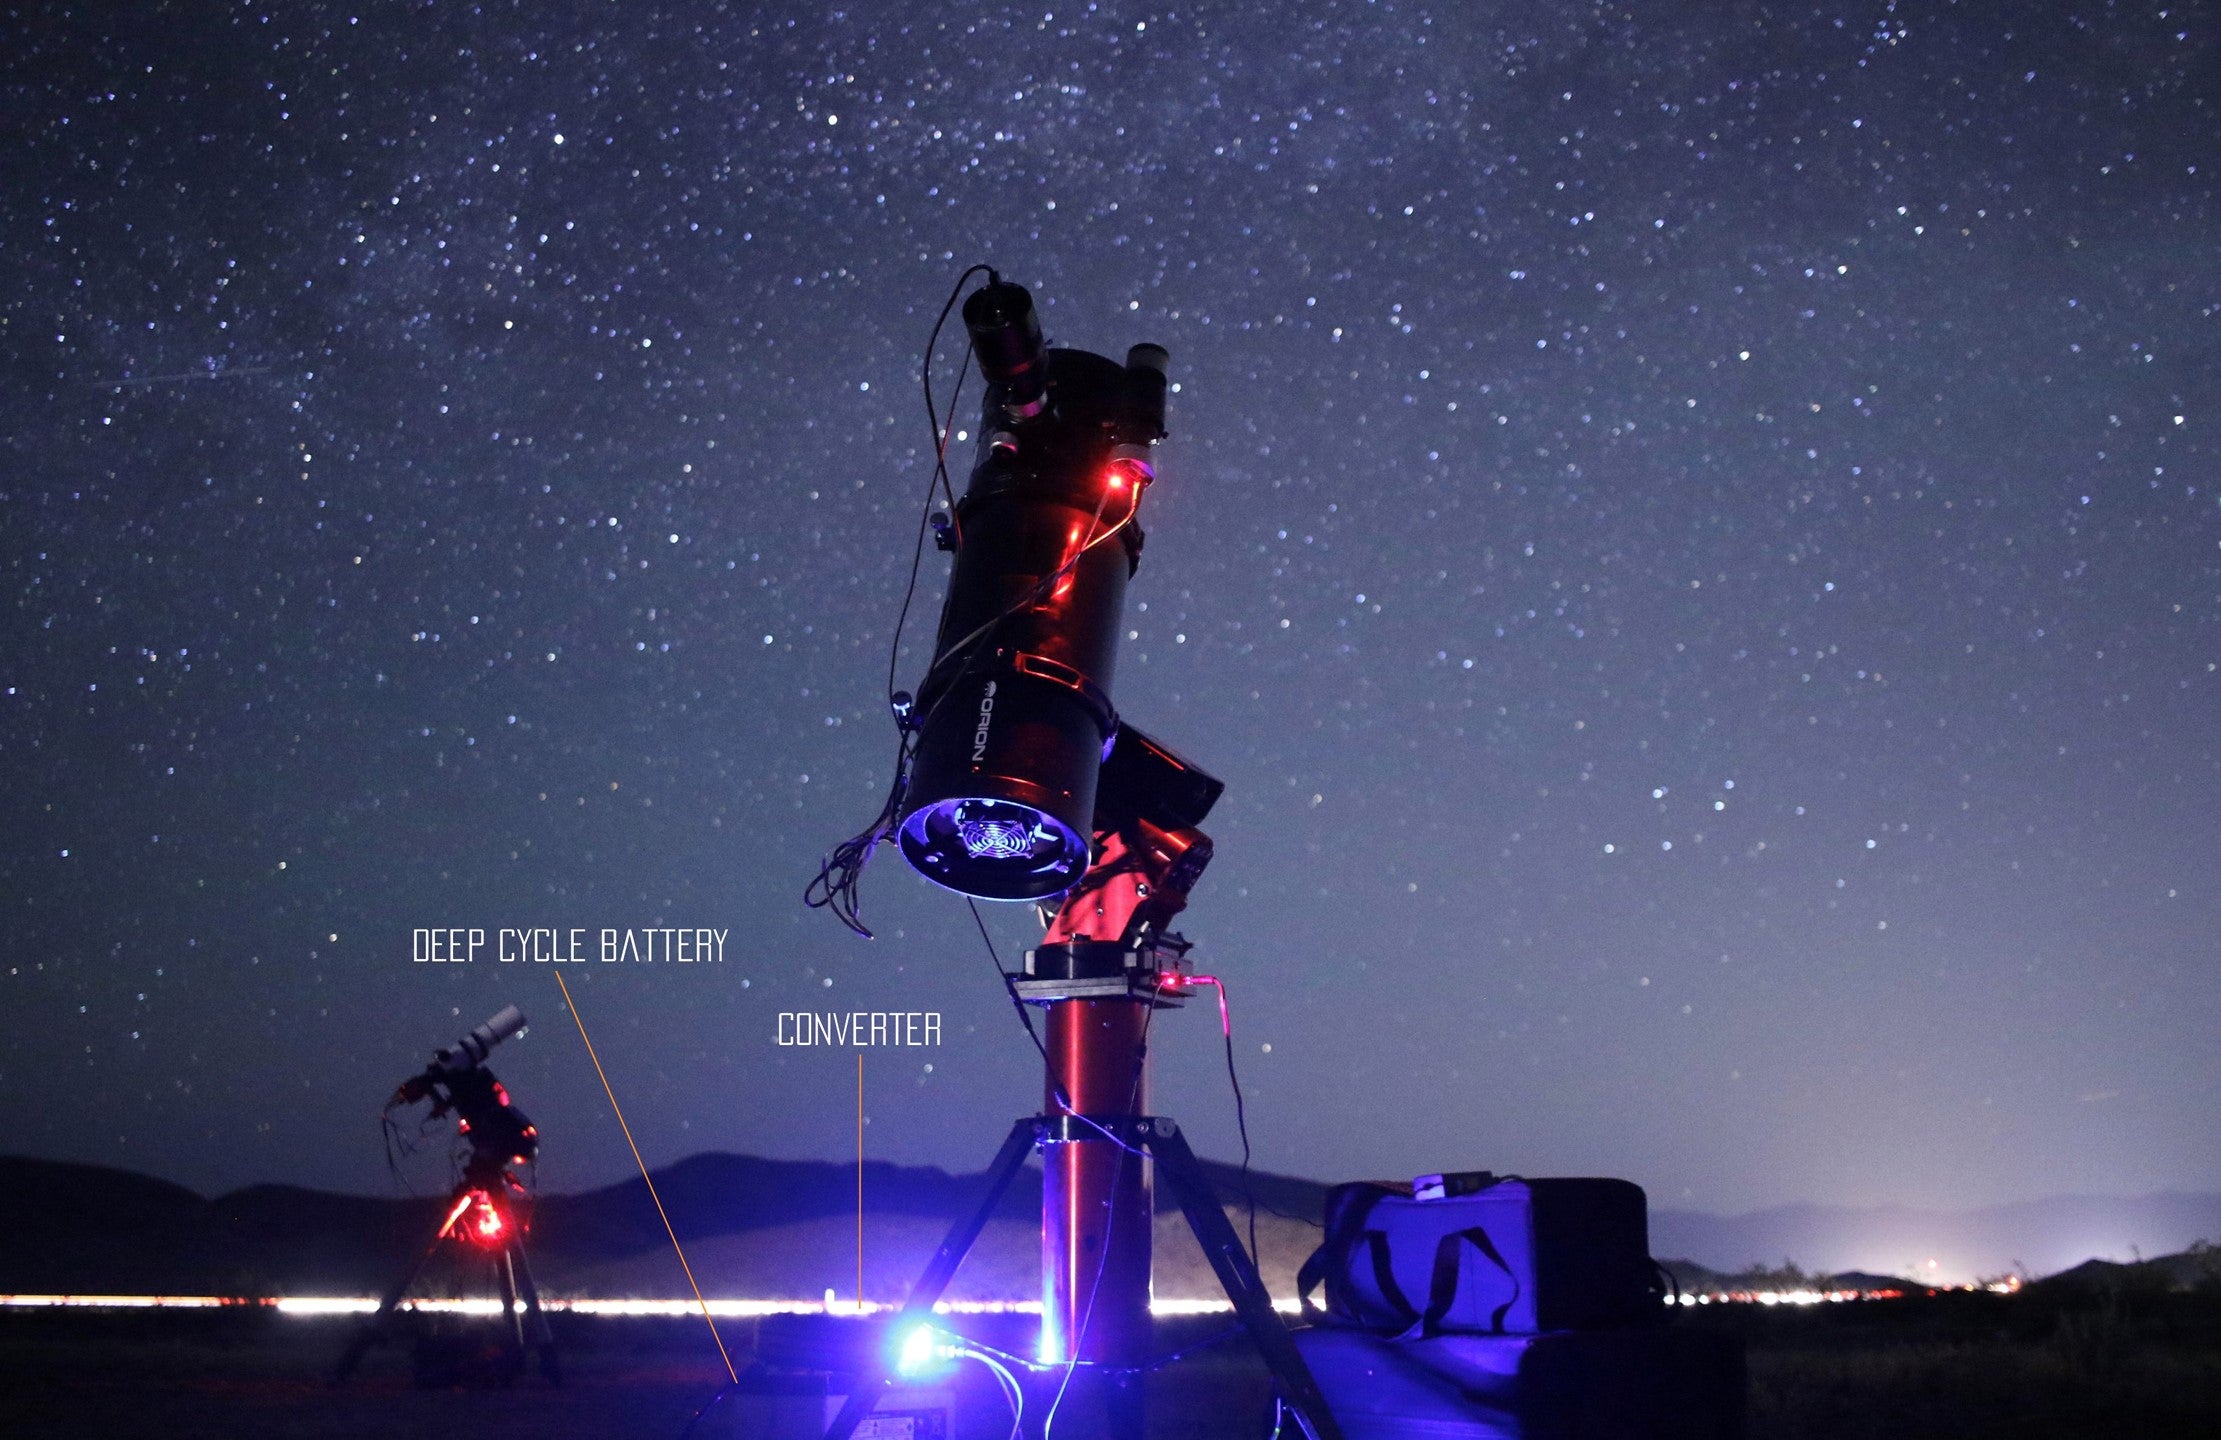 Telescope Power for Astrophotography